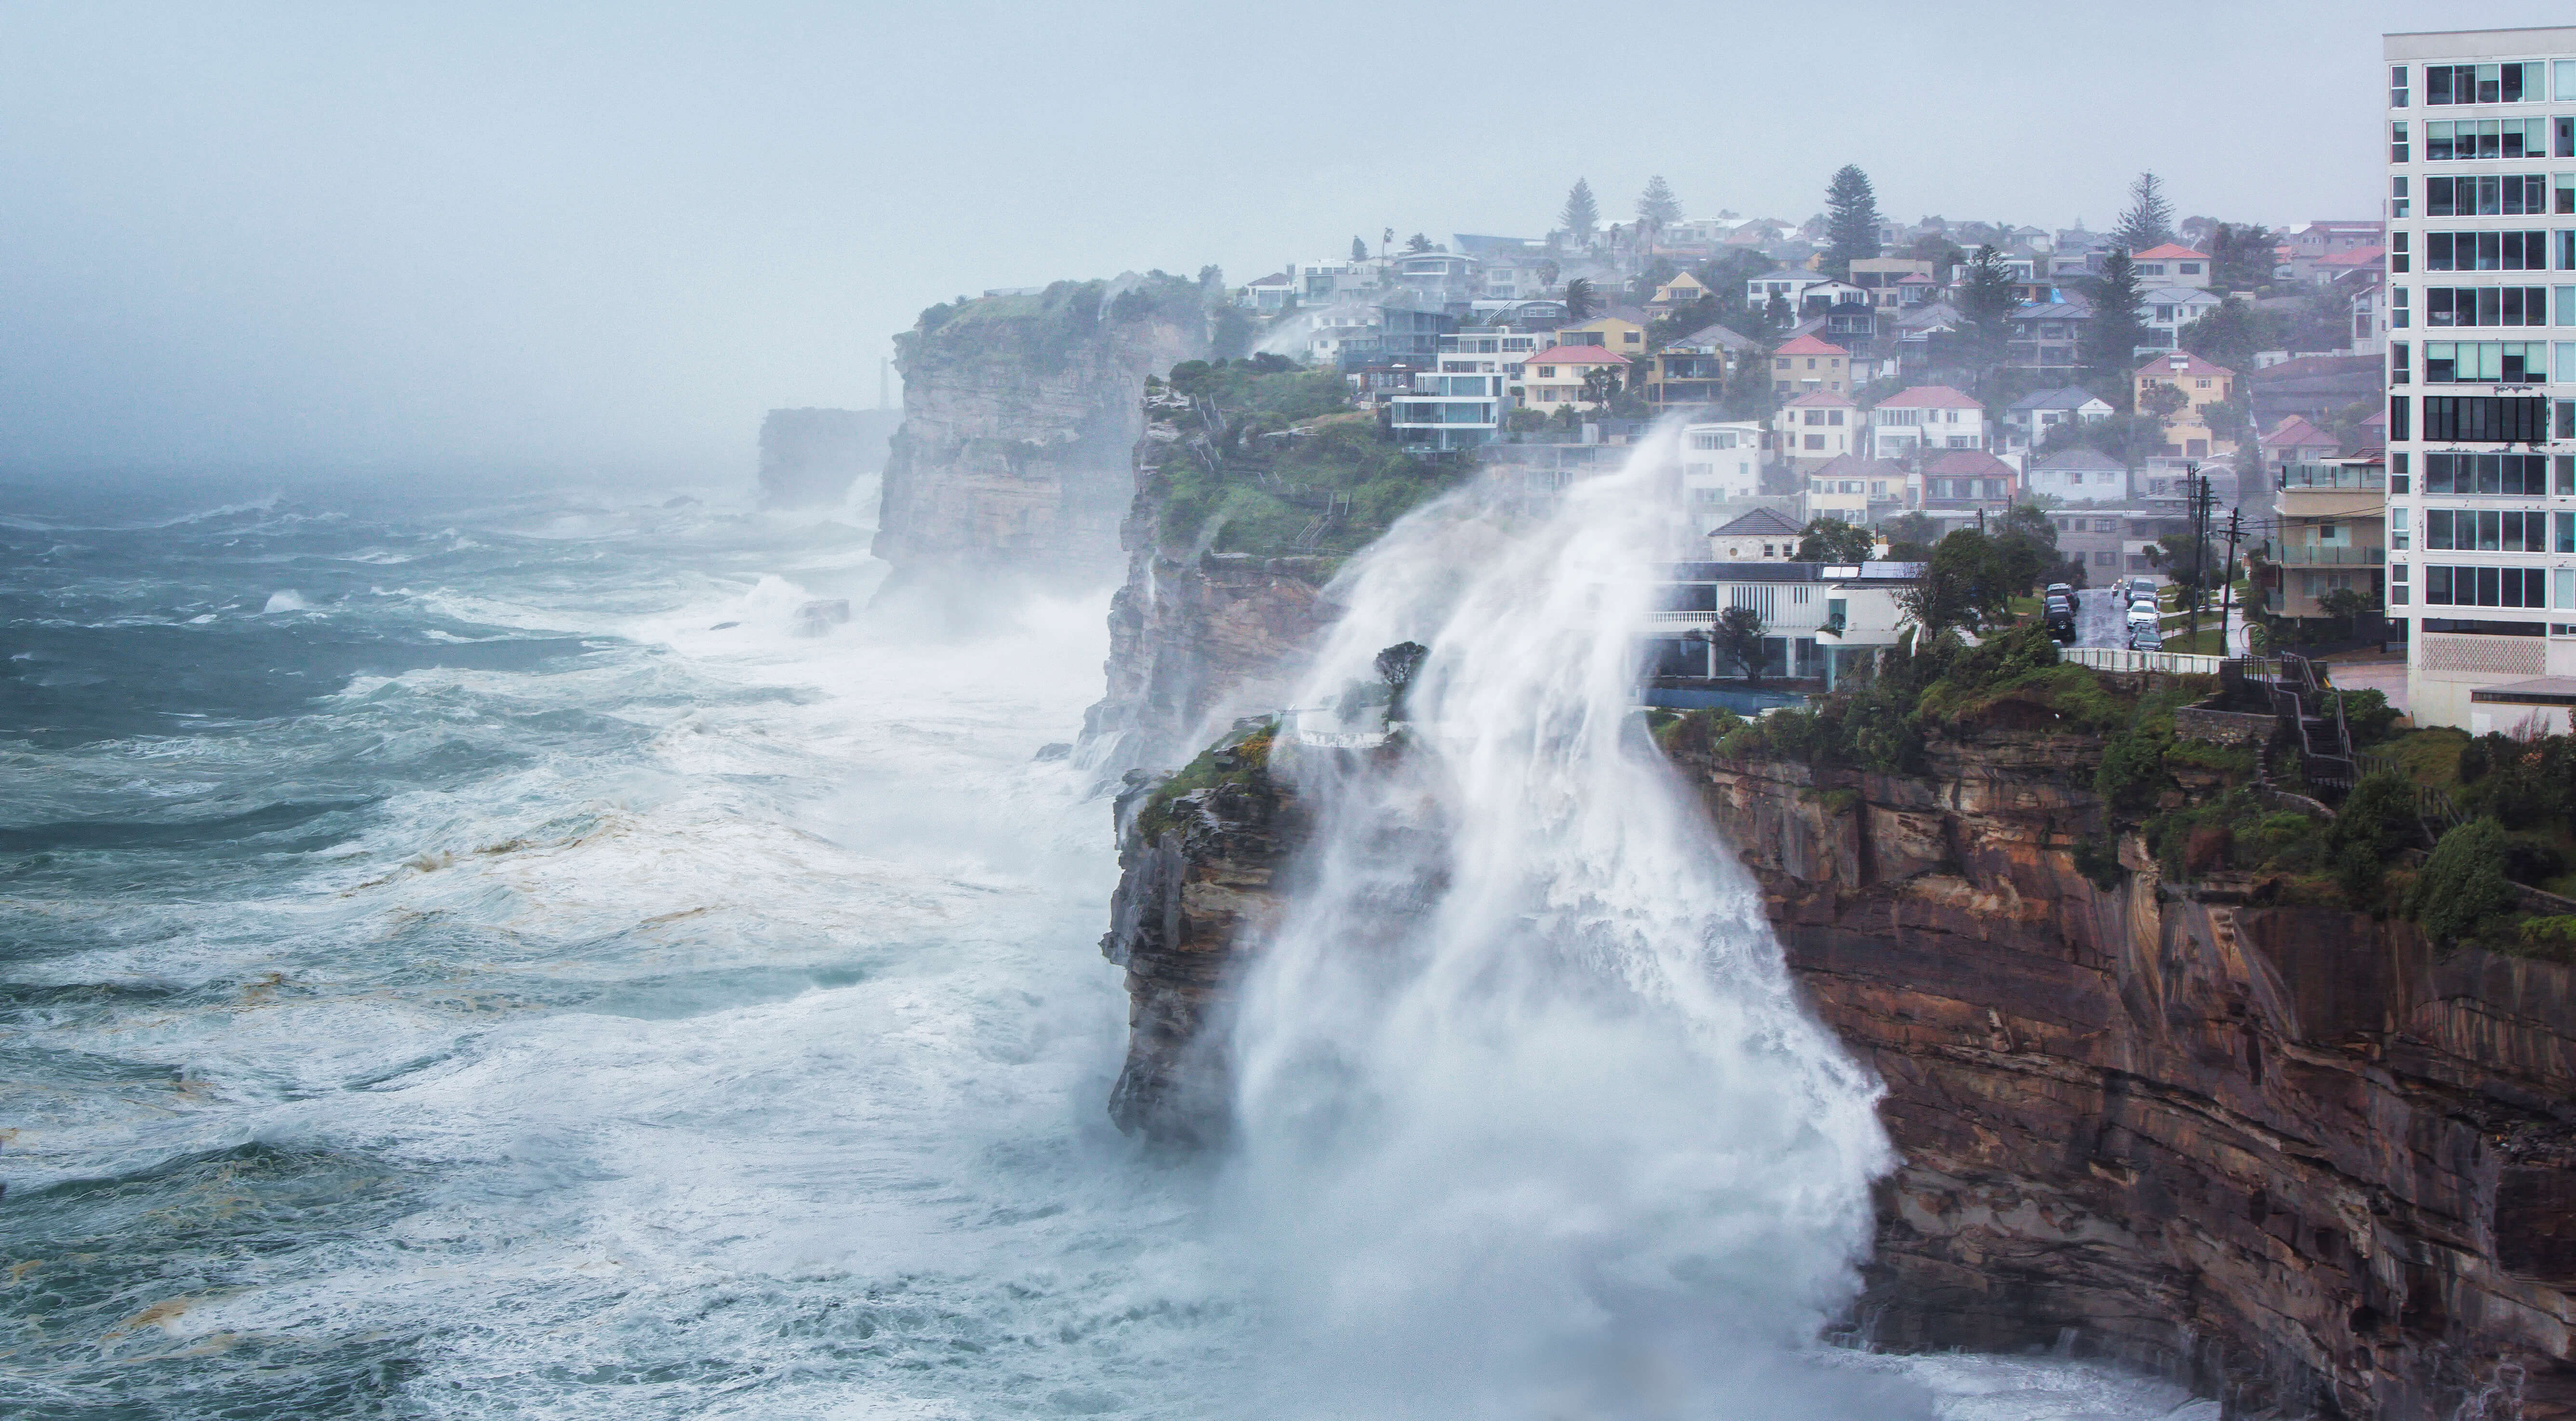 Coastline with habitations close to the edge of a cliff in a stormy weather with an impressive wave splashing up the cliff to the houses